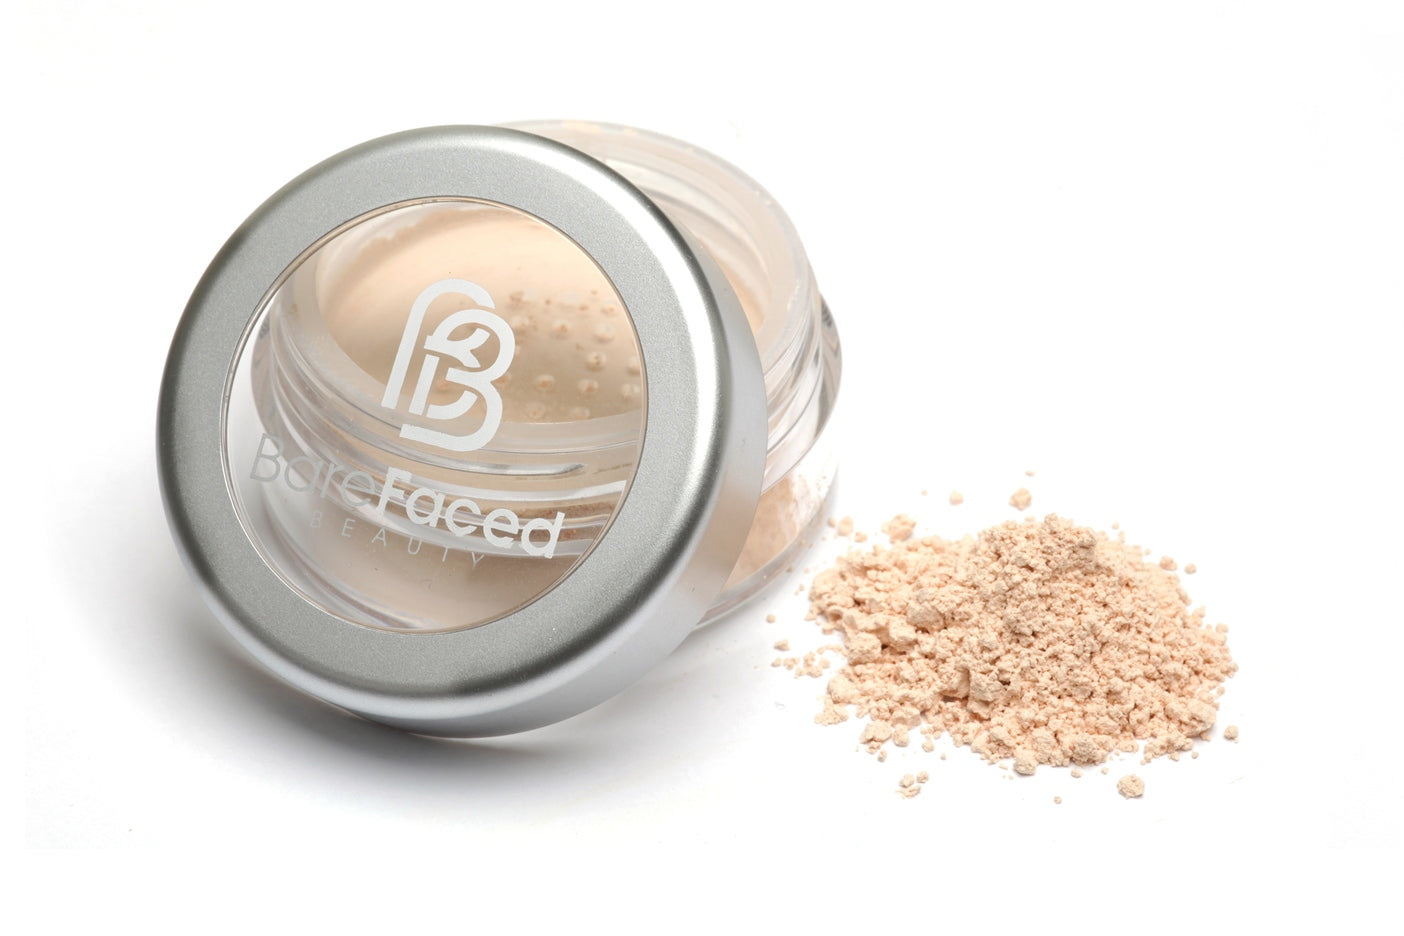 BareFaced Beauty Natural Finishing Powder in English Rose. Ethical mineral makeup. The powder mineral foundation is pictured in a clear plastic jar with a small pile of the powder sitting next to it.